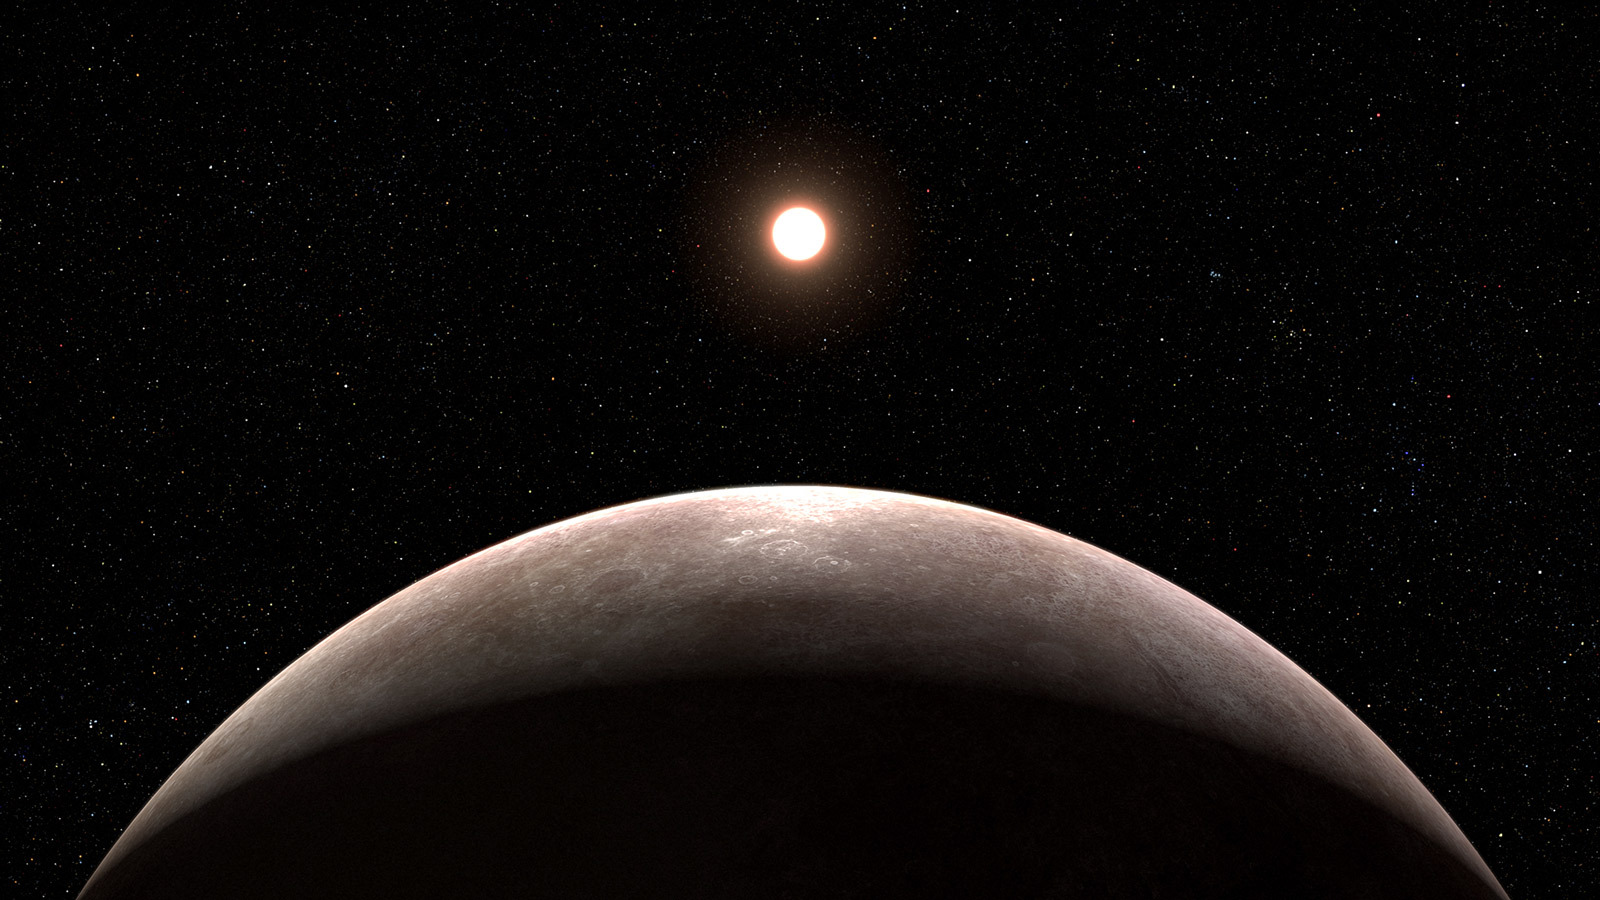 An illustration of an exoplanet is seen in the foreground in front of its bright star, above. The background is filled with stars against the black of space.